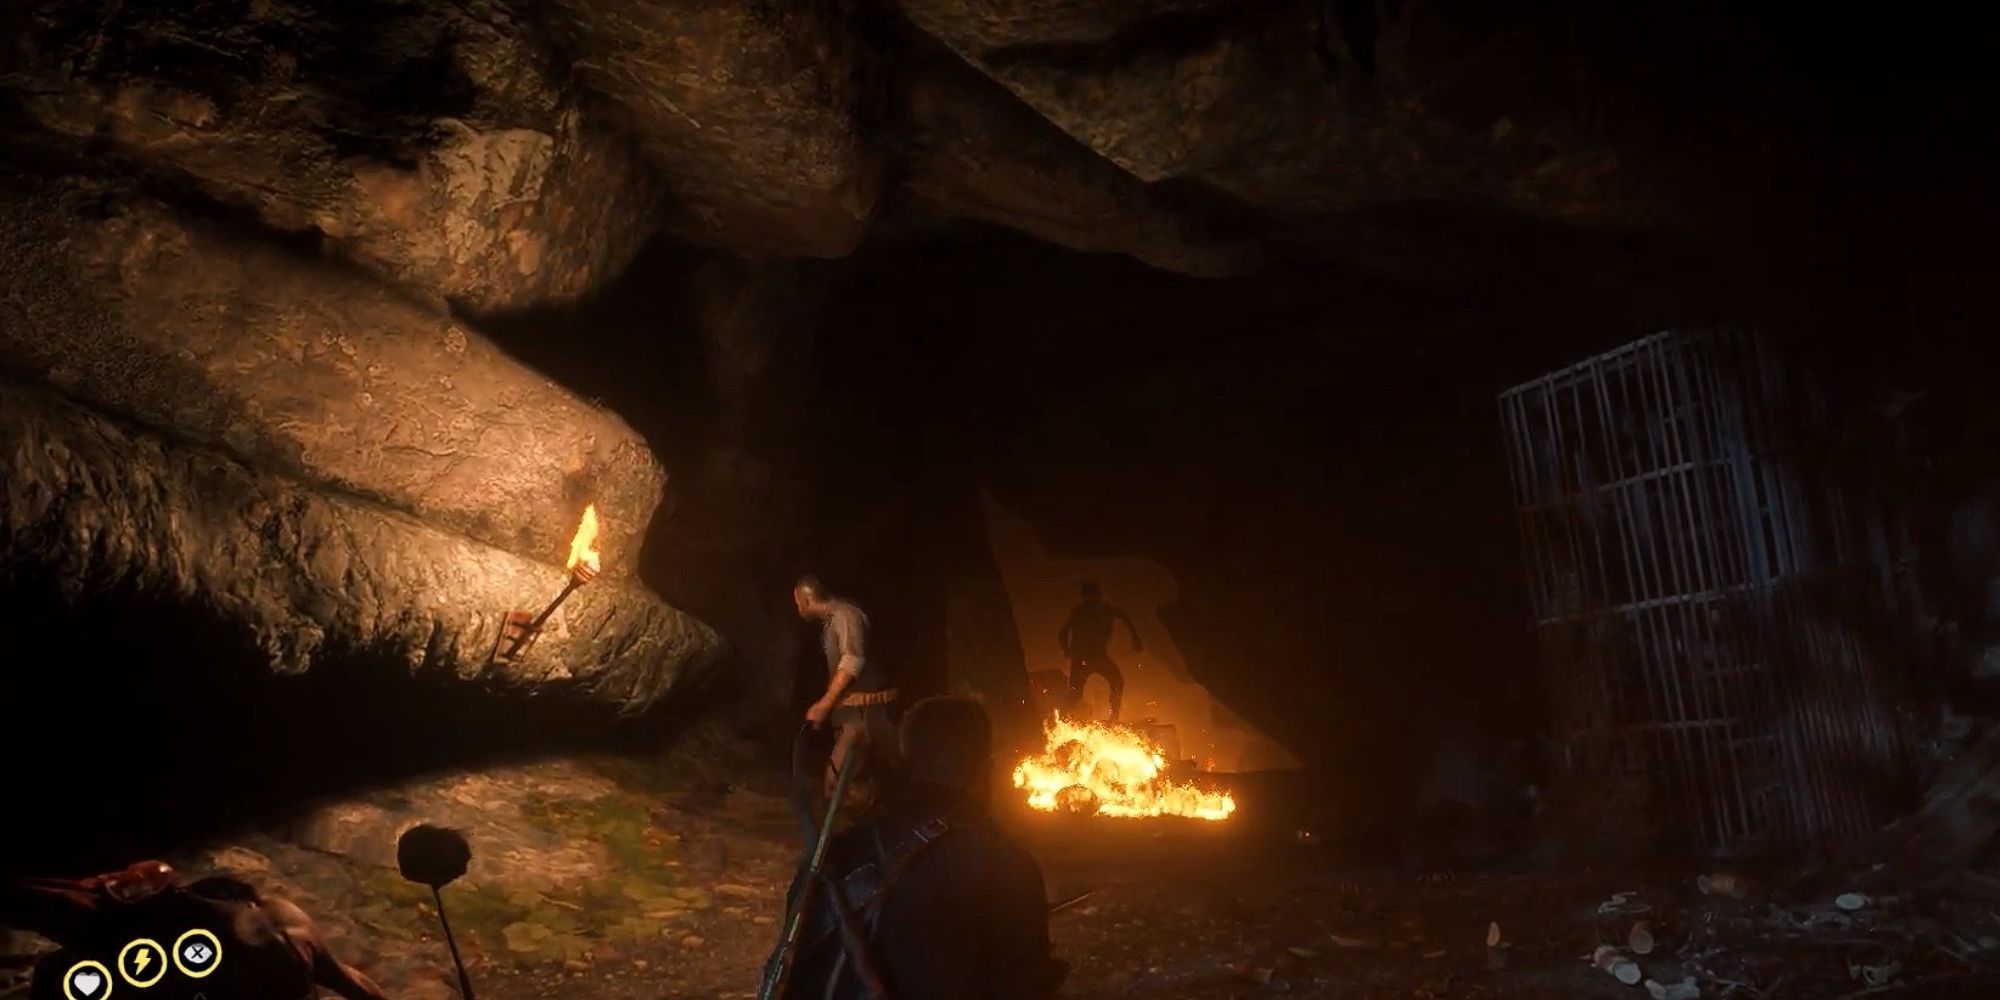 Murfrees run through fire at the mouth of a cave toward Arthur and Charles